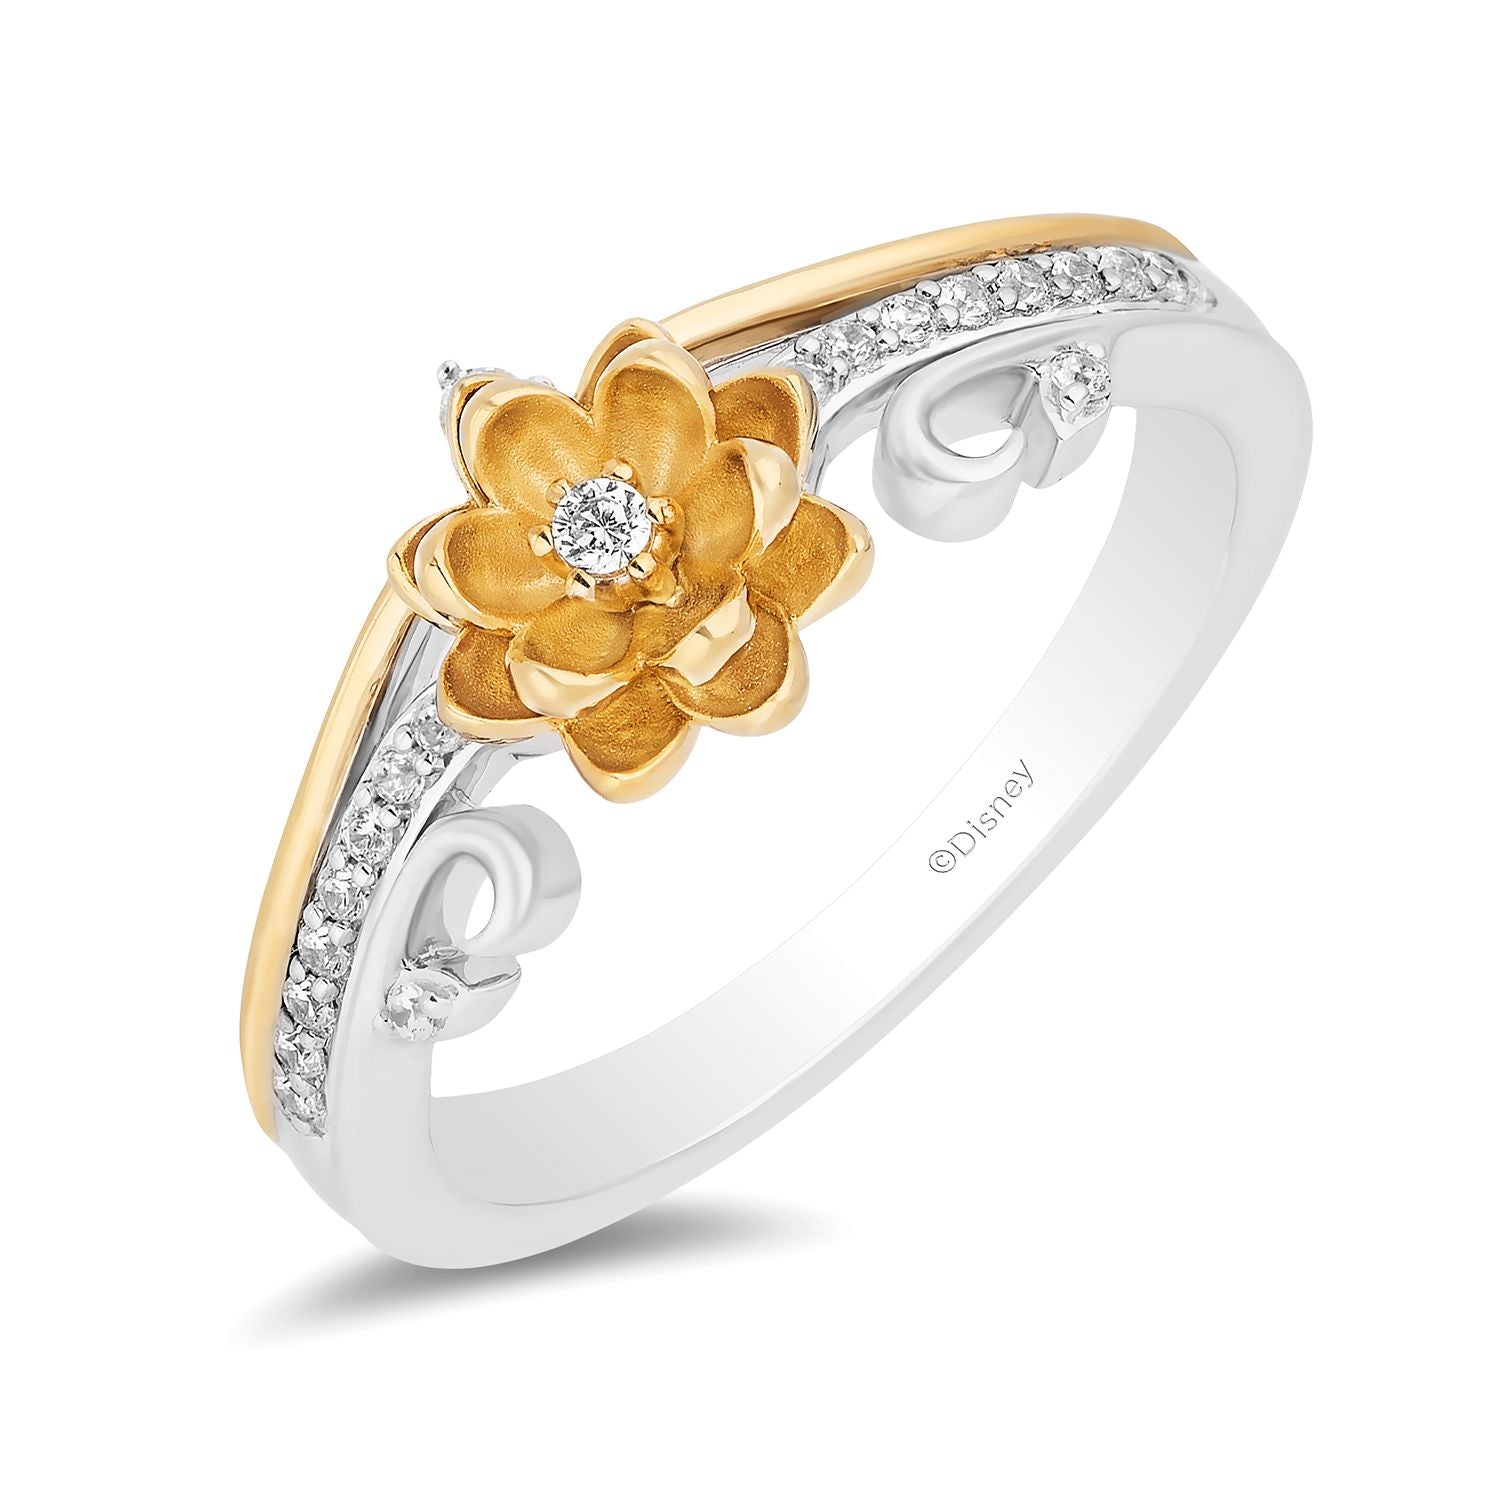 Disney Tiana Inspired Diamond Flower Ring in Sterling Silver and